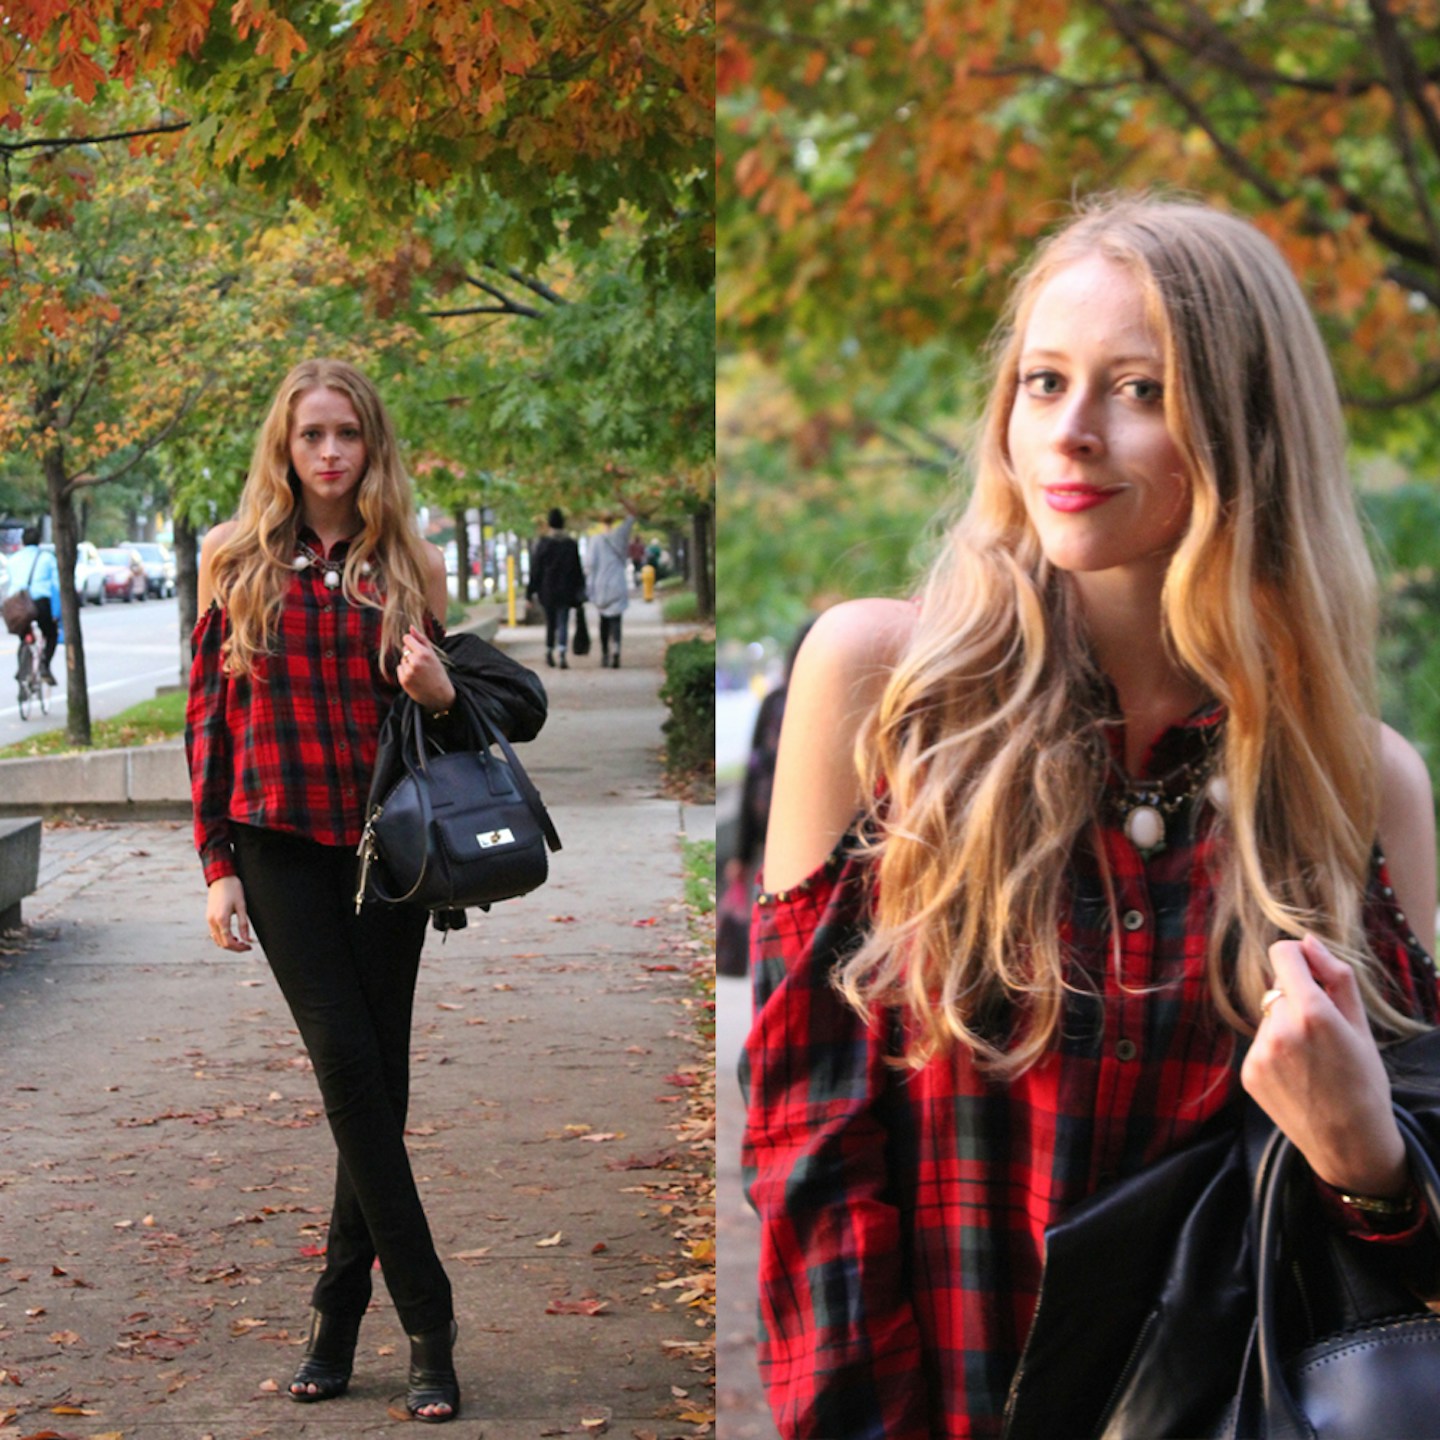 How to wear plaid without looking like a lumberjack